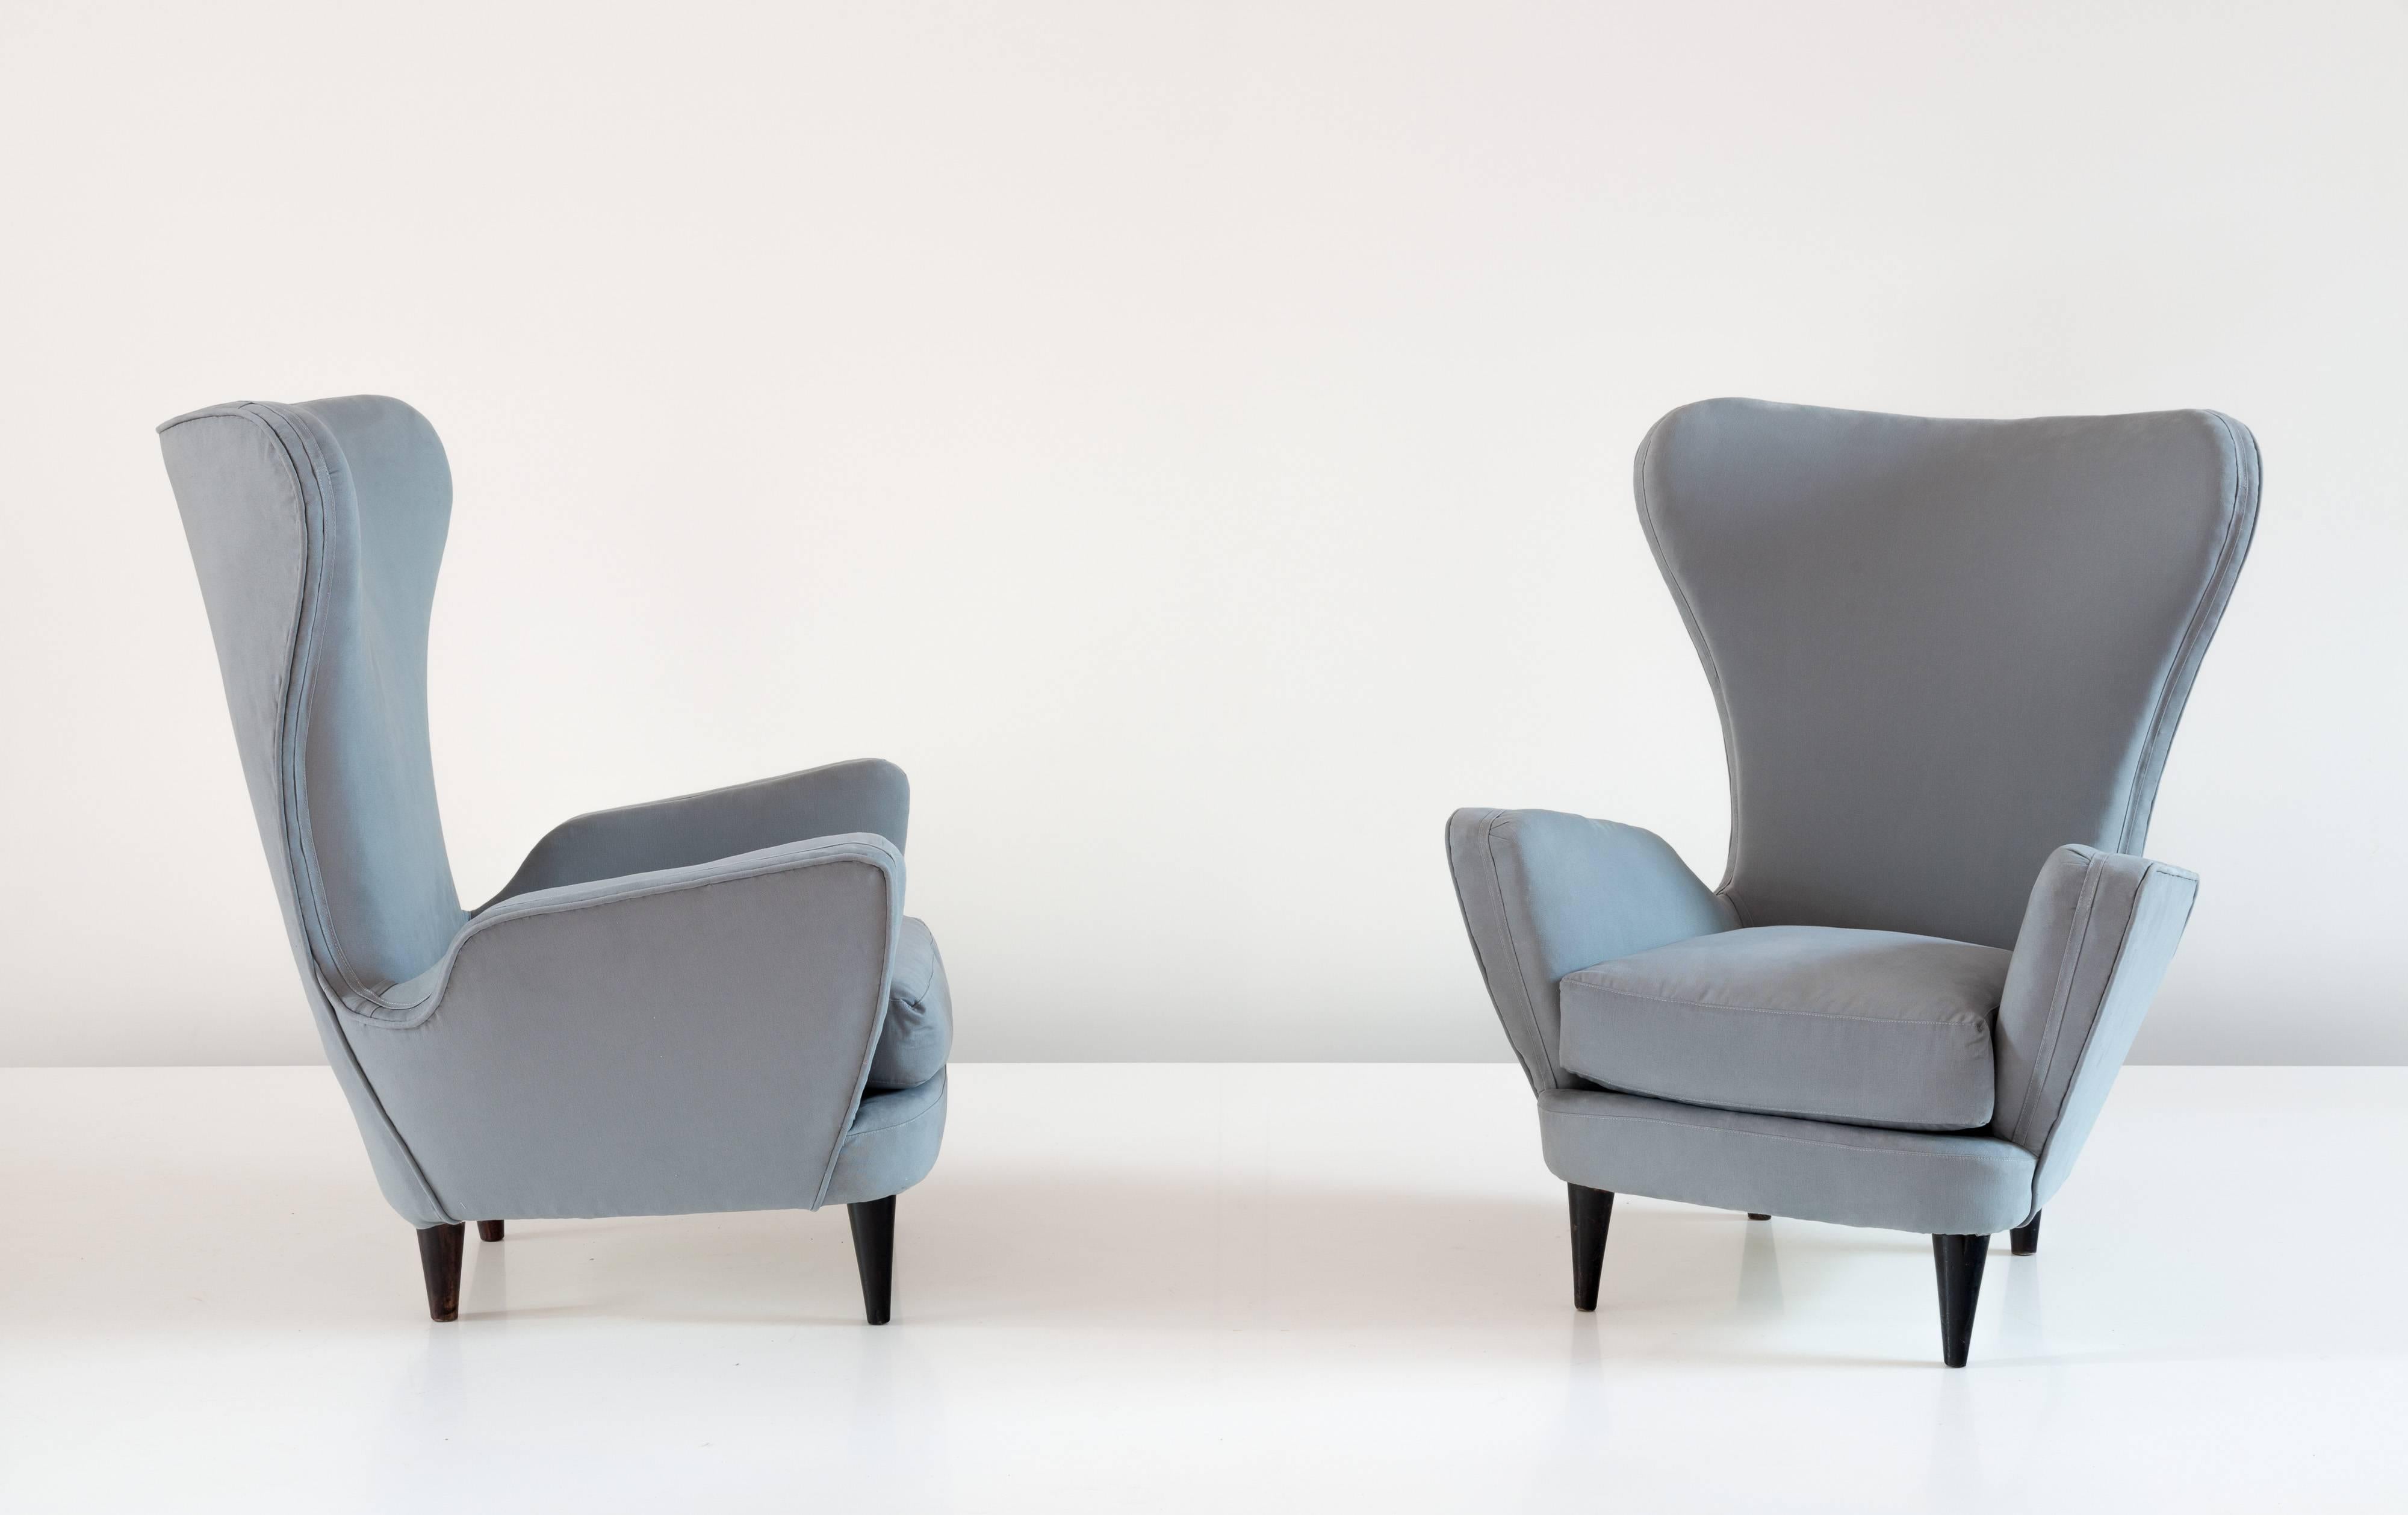 Pair of sculptural high back modern armchairs, 1950,
cotton, ebonized wood,
upholstery in grey cotton,
round tapering legs.
Measures: H 99 cm 66 x 68 cm.
provenience: Hotel Presidential, Como Lake, Italy.